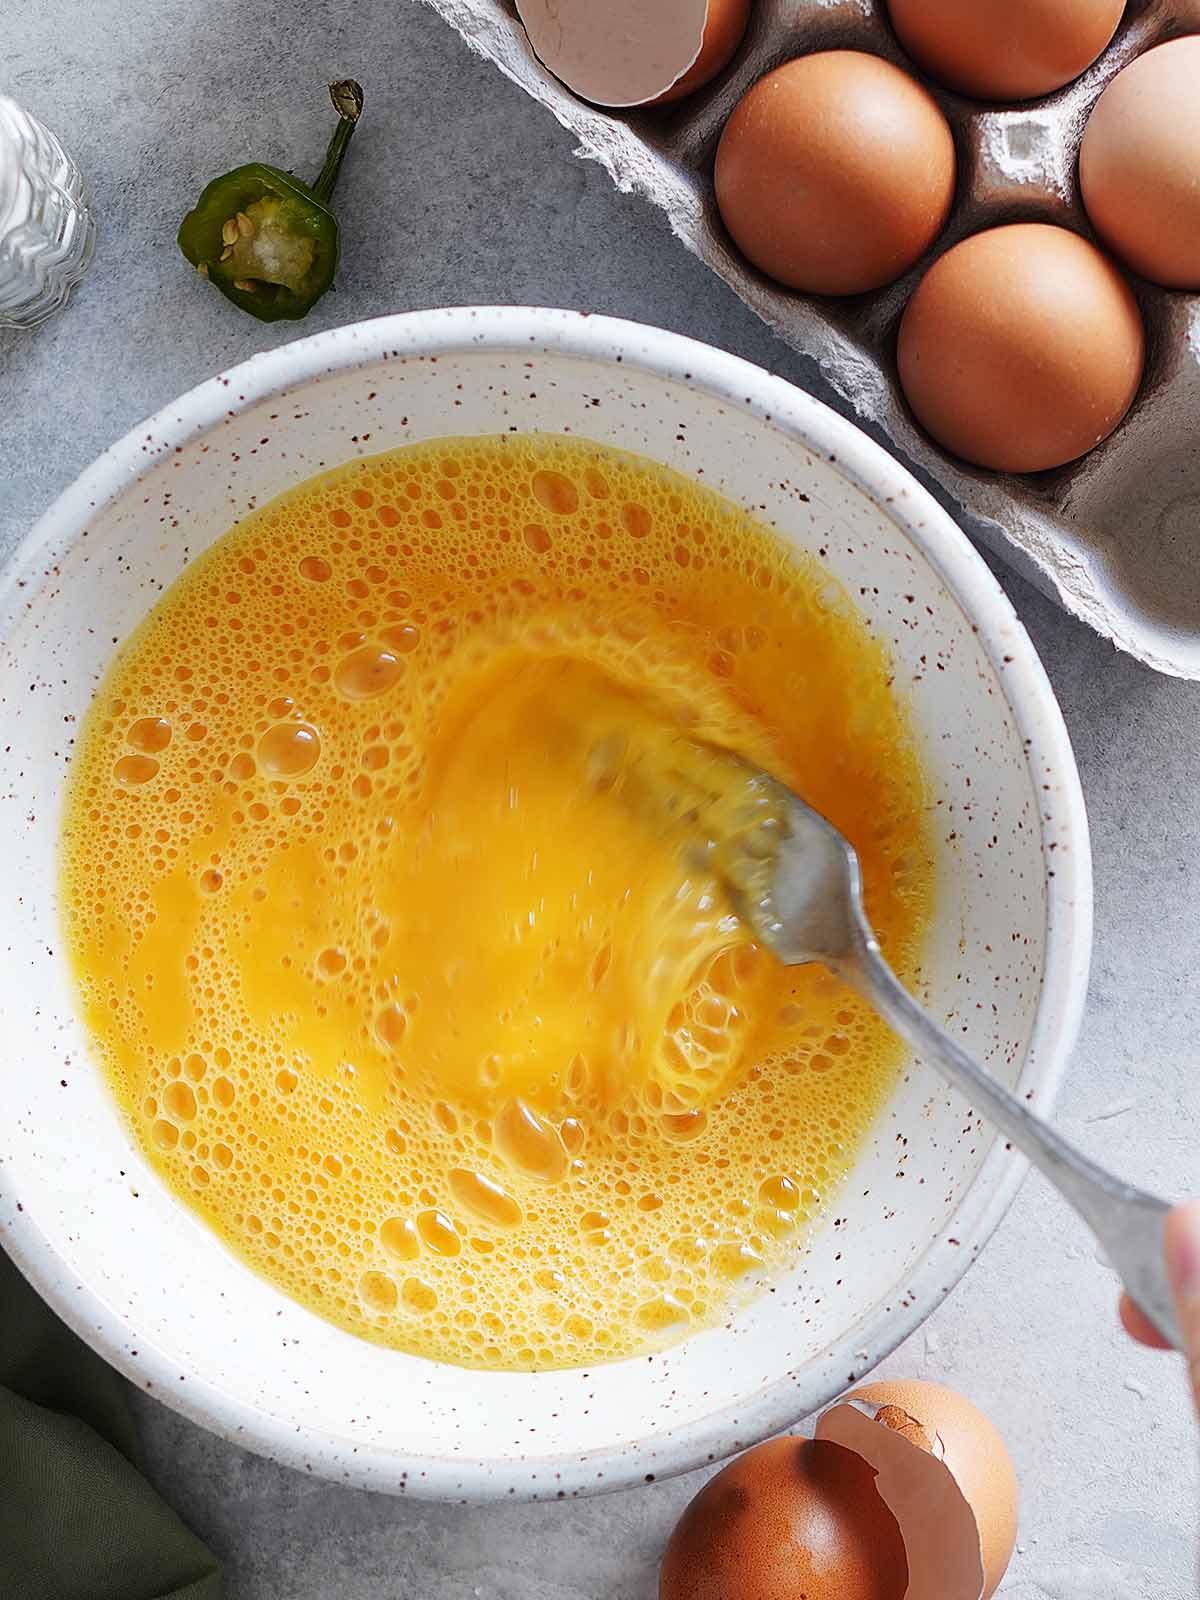 Scrambling eggs with a fork in a white bowl.